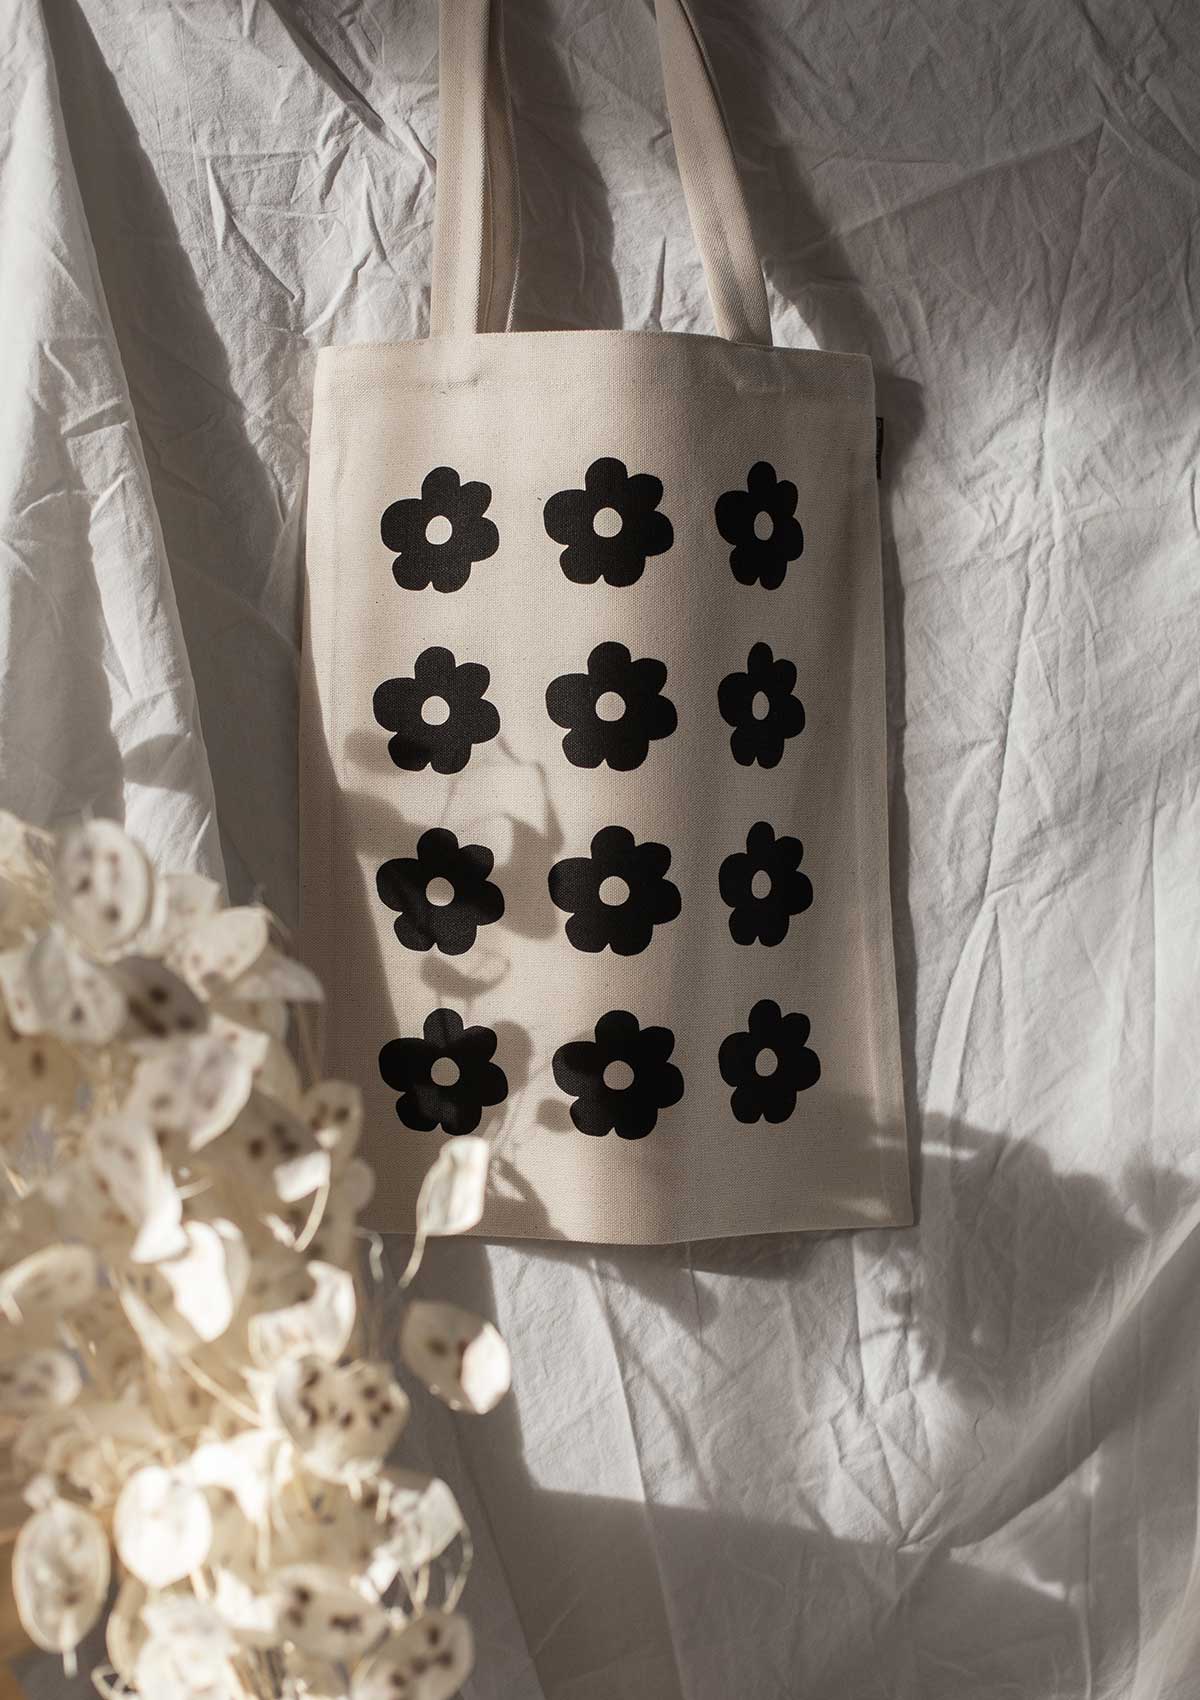 Tote bag with black flowers print by romanian designer Mauverien.